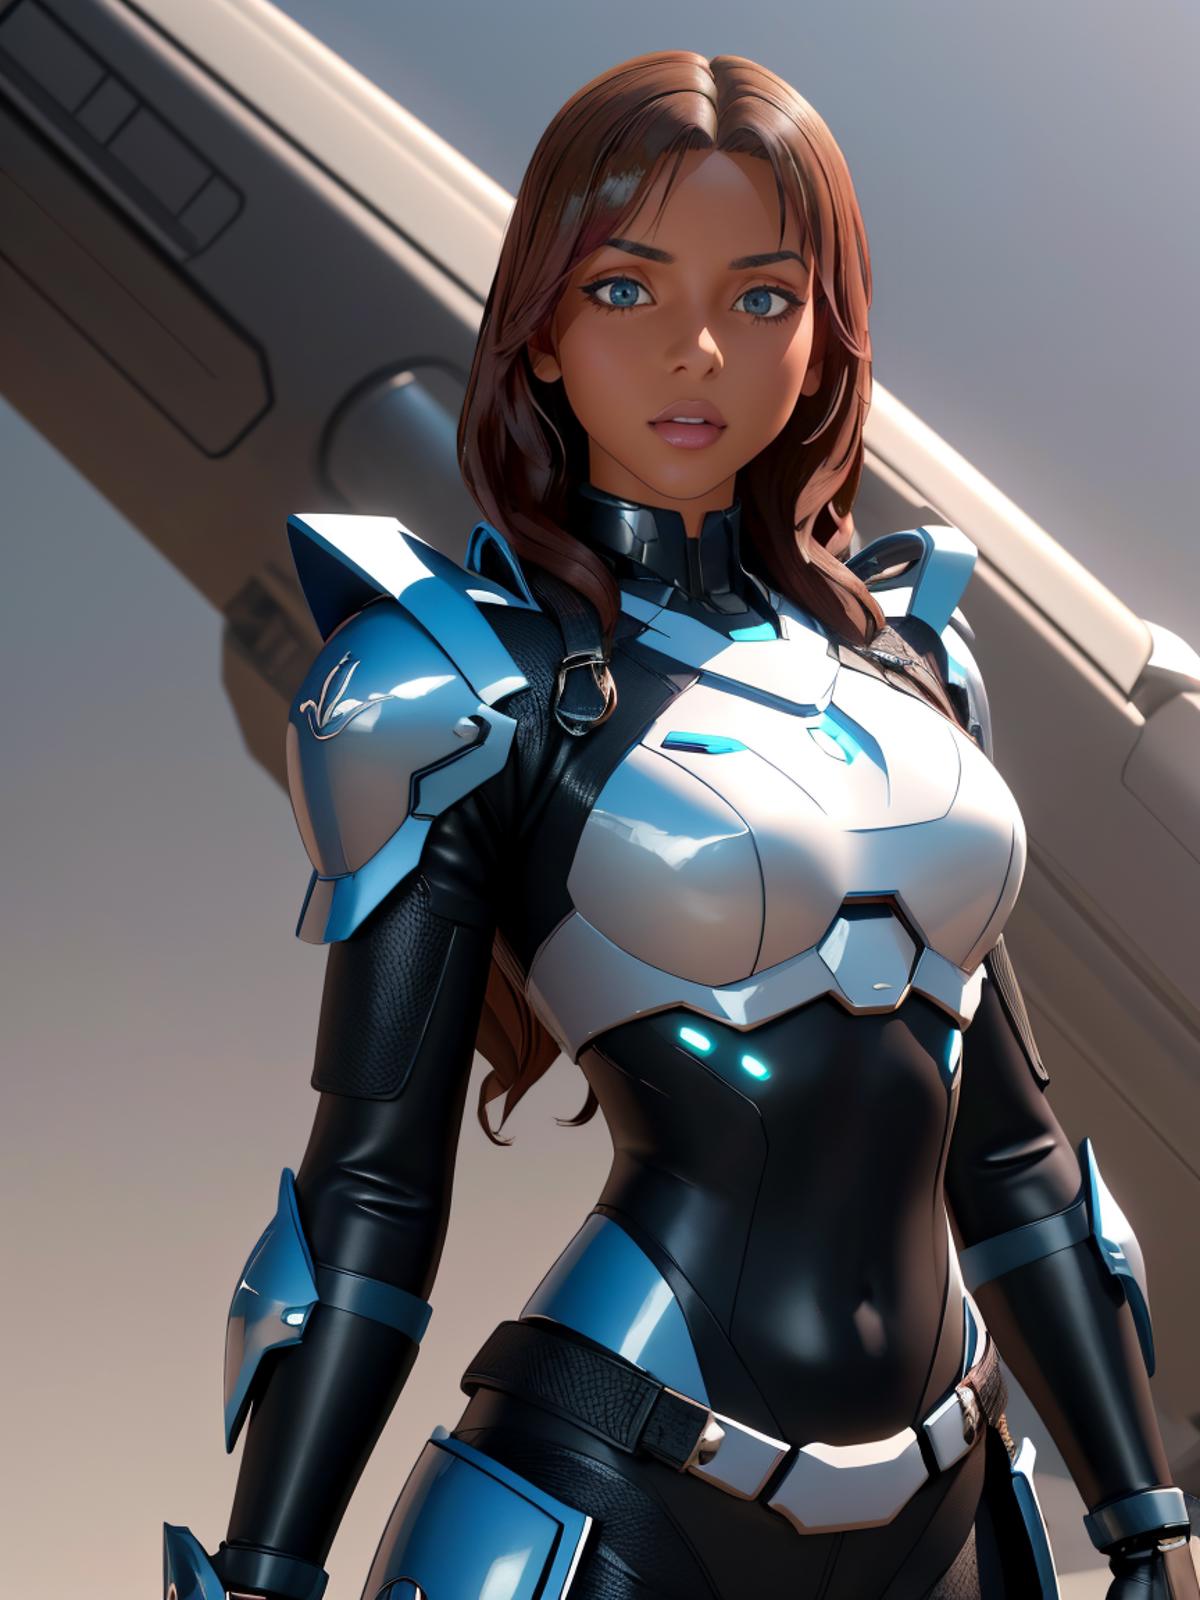 3D animated female character wearing black and white armor with blue eyes.